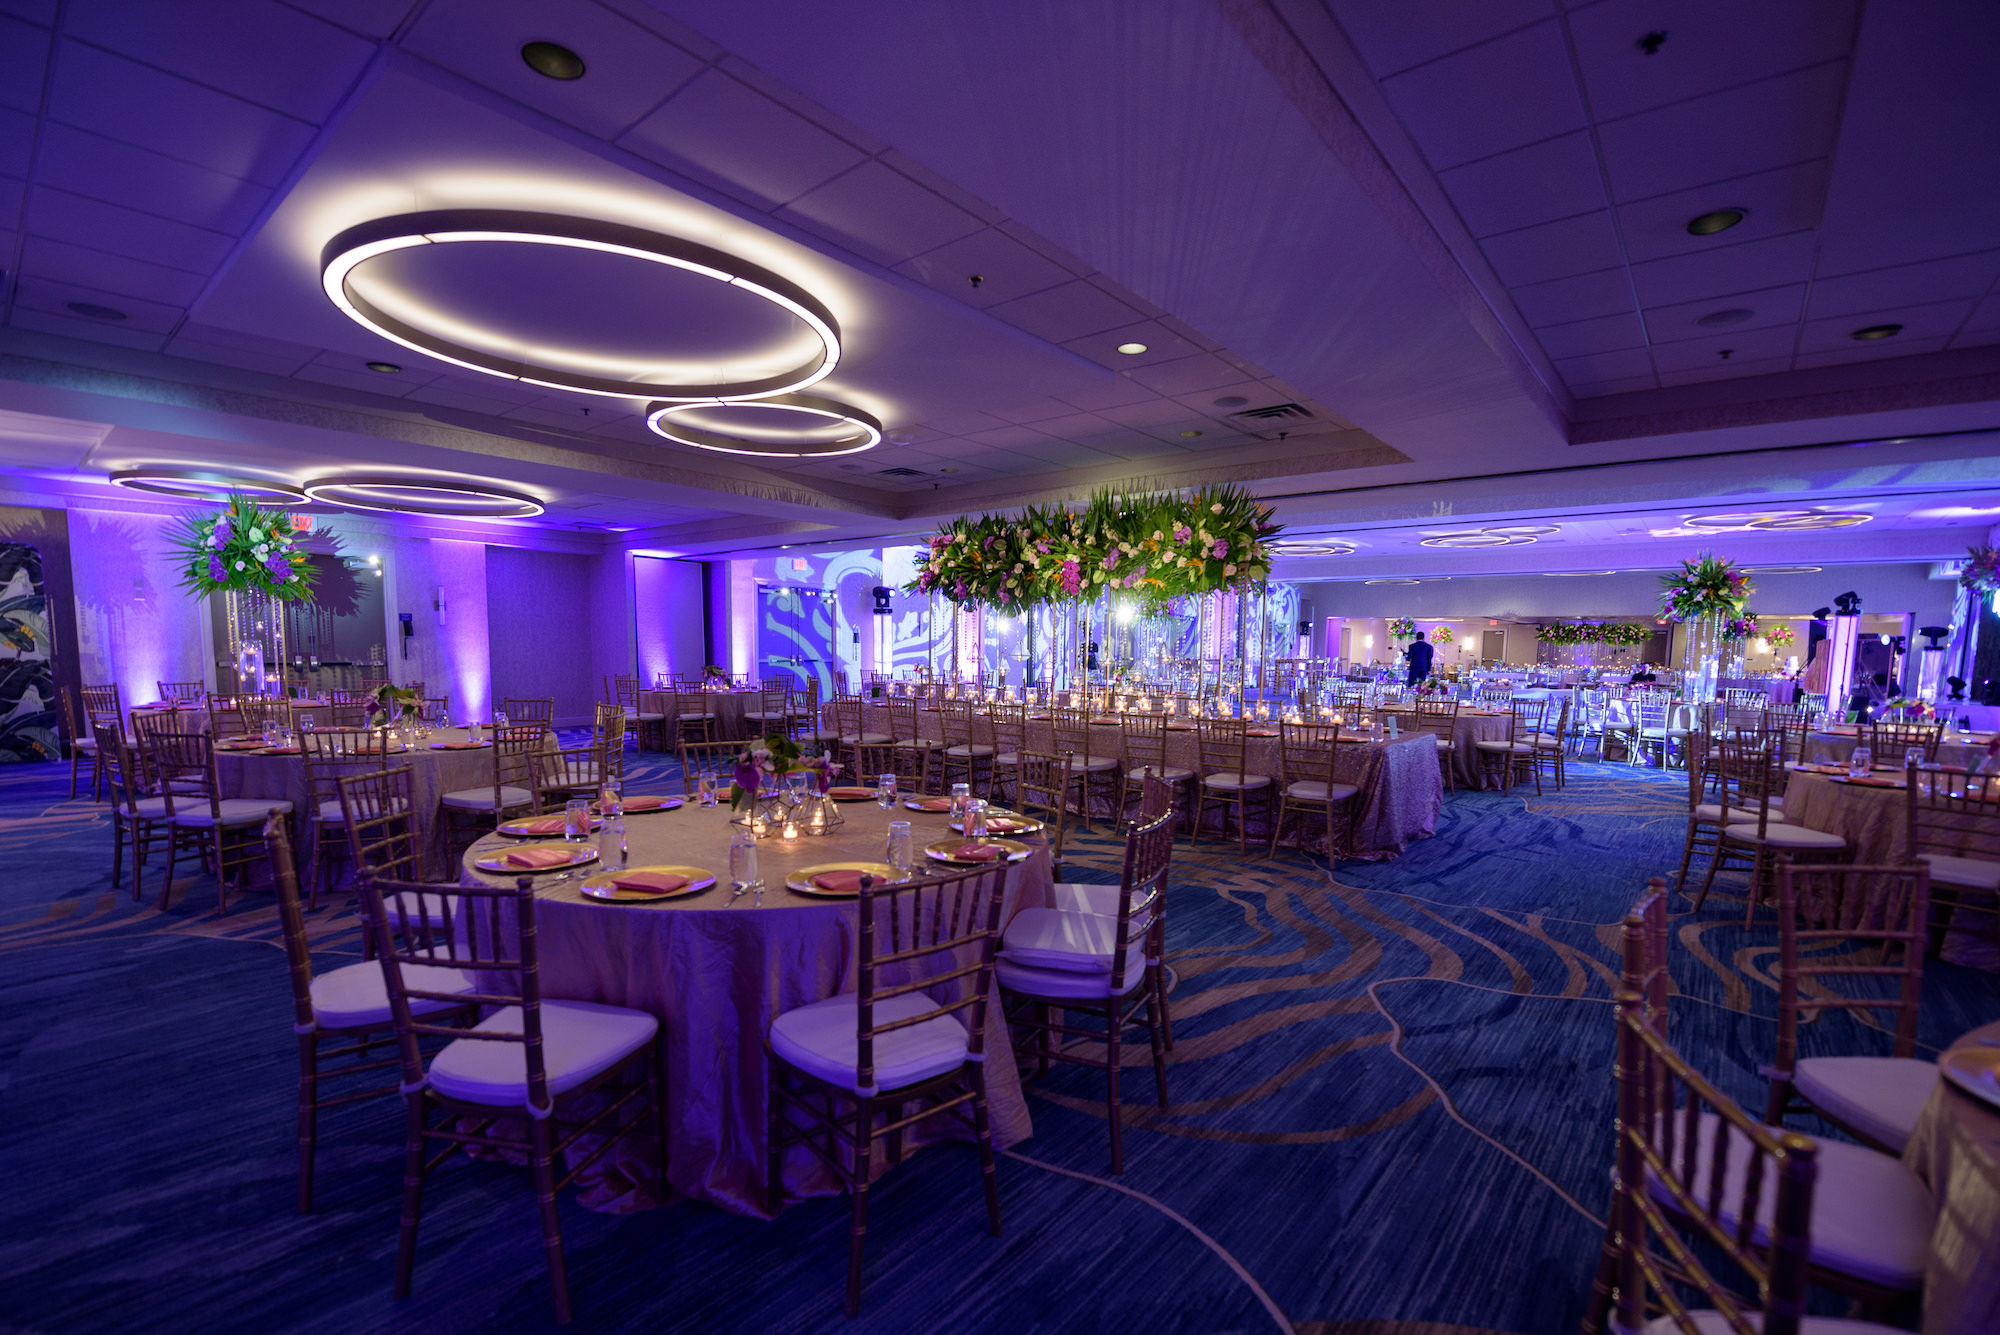 Modern Ballroom Indian Wedding Reception and Tall Centerpieces with Long Feasting Tables and Purple Uplighting | Tampa Bay Venue Hilton Clearwater Beach Resort and Spa | Gabro Event Rentals